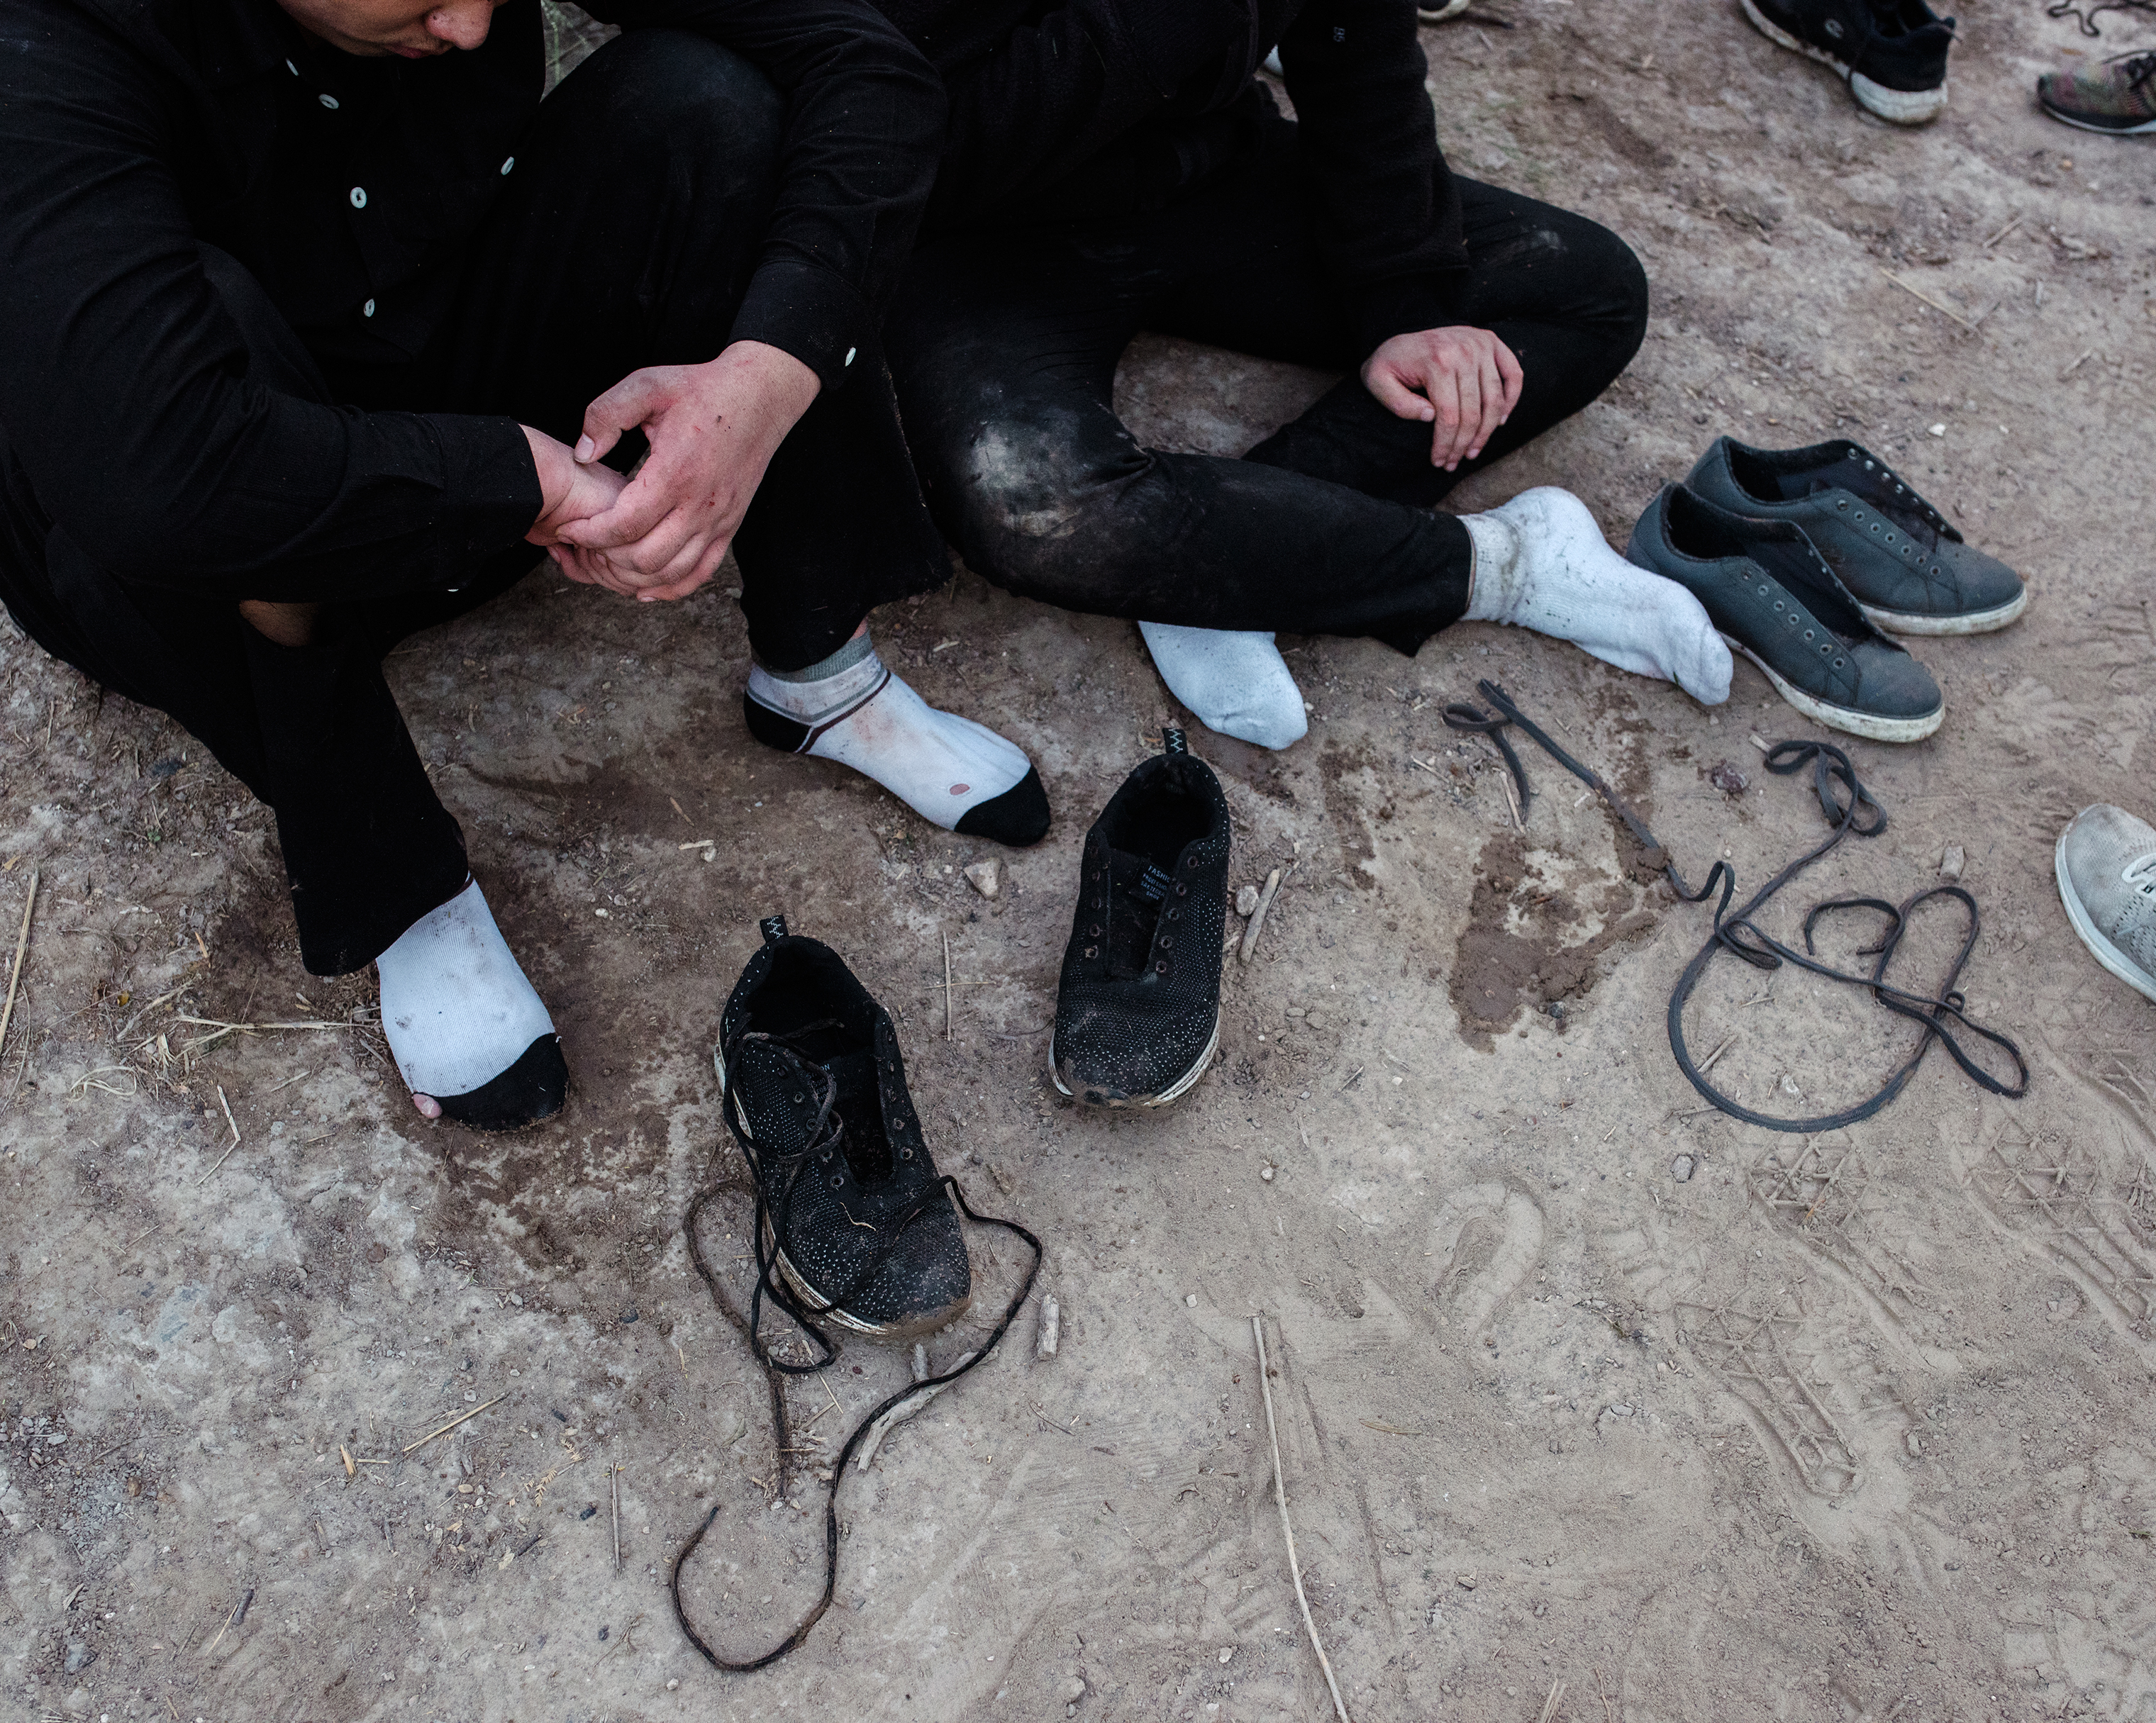 Members of a group of migrants from China and Guatemala unlace their shoes before being taken into custody, after illegally crossing the border through the Rio Grande, on Sept. 25. (John Francis Peters for TIME)